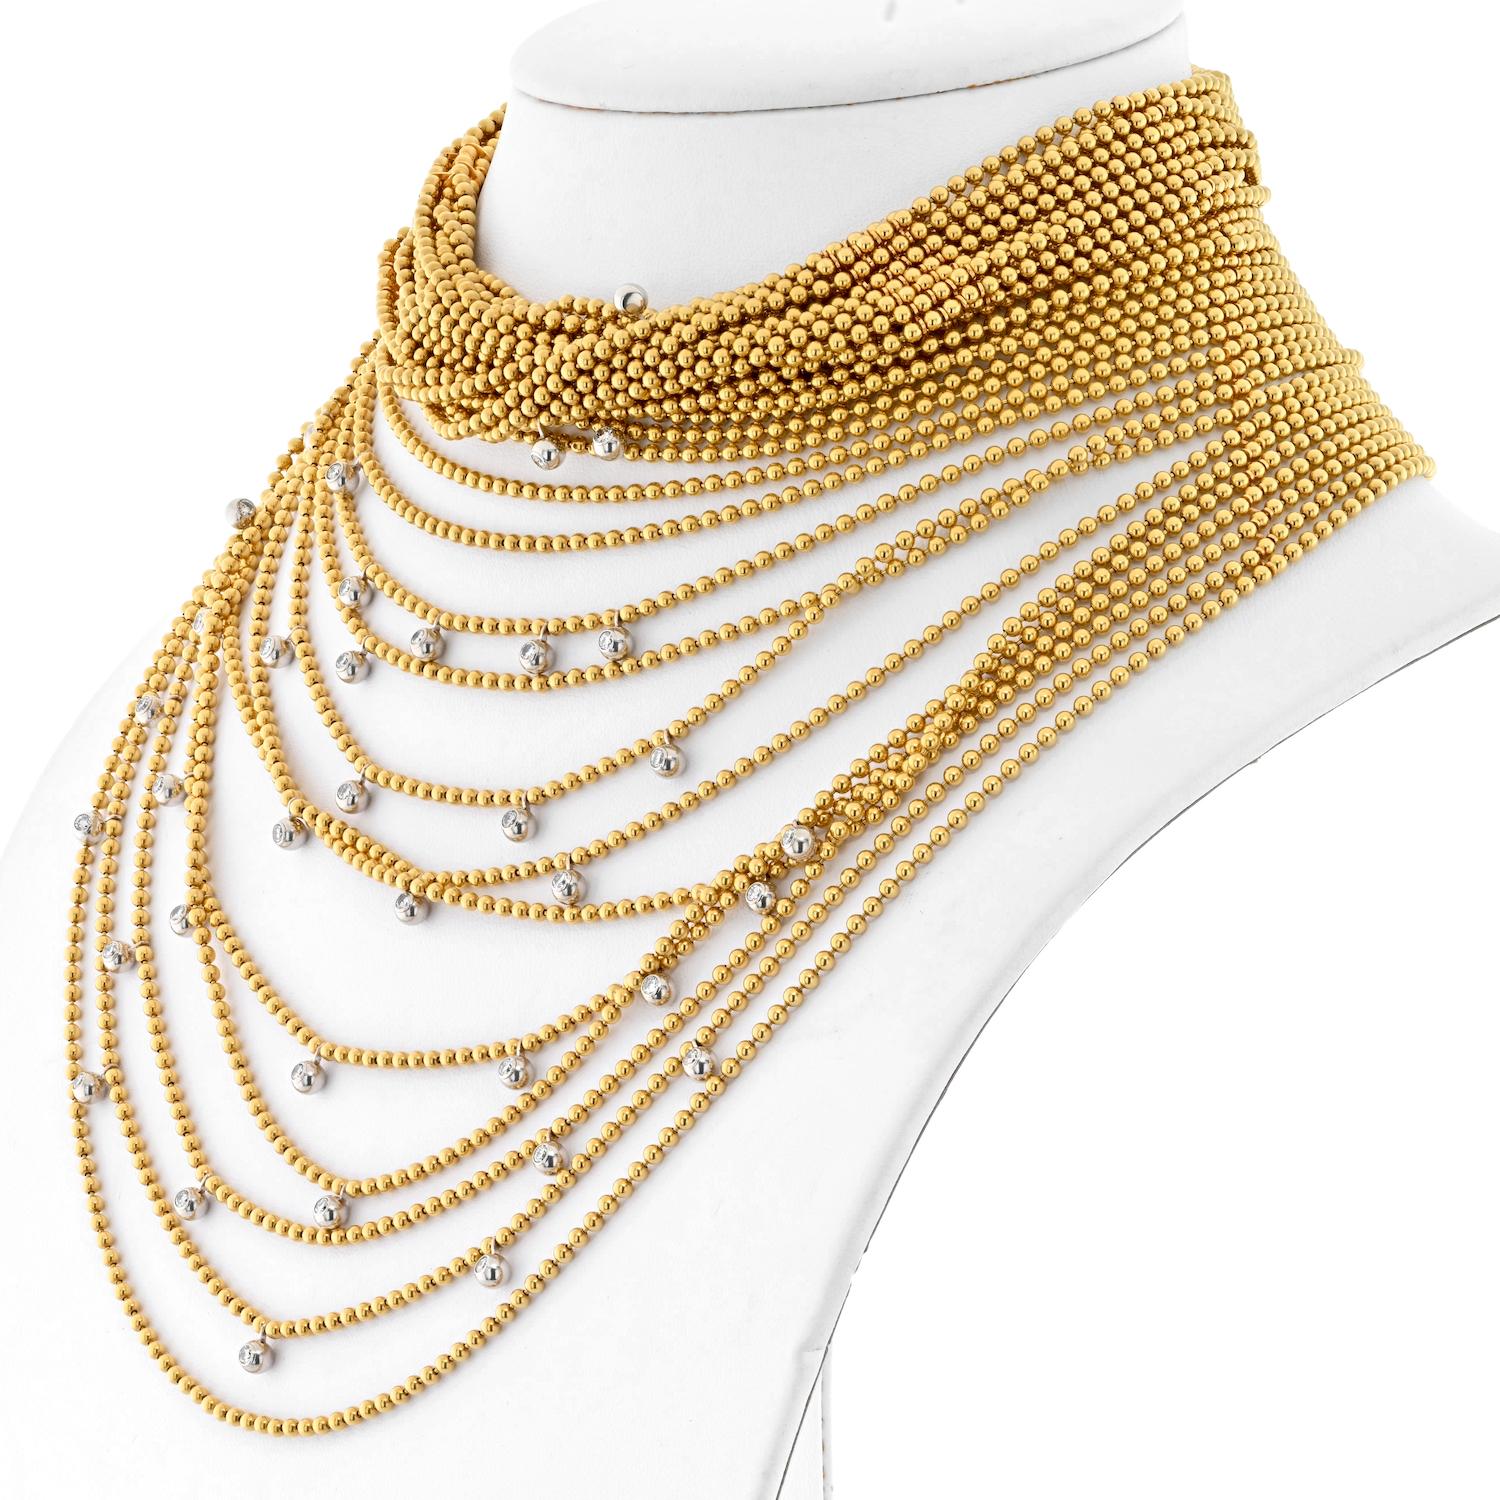 Modern Cartier Draperie De Decollete 18K Yellow Gold of 34 Rows of Beads Necklace For Sale